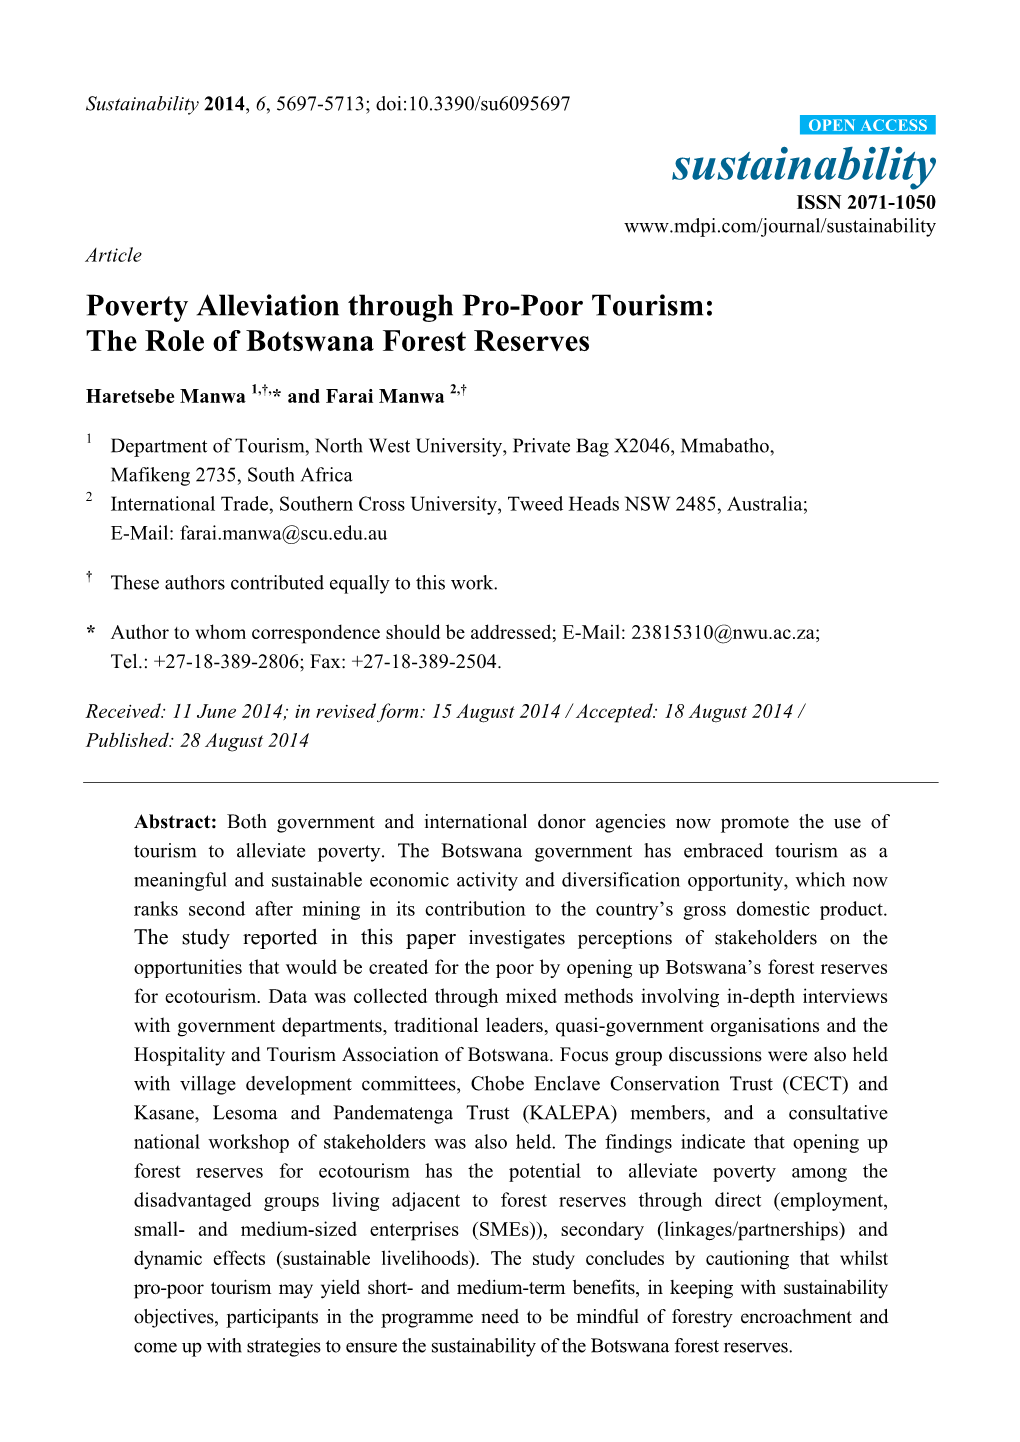 Poverty Alleviation Through Pro-Poor Tourism: the Role of Botswana Forest Reserves